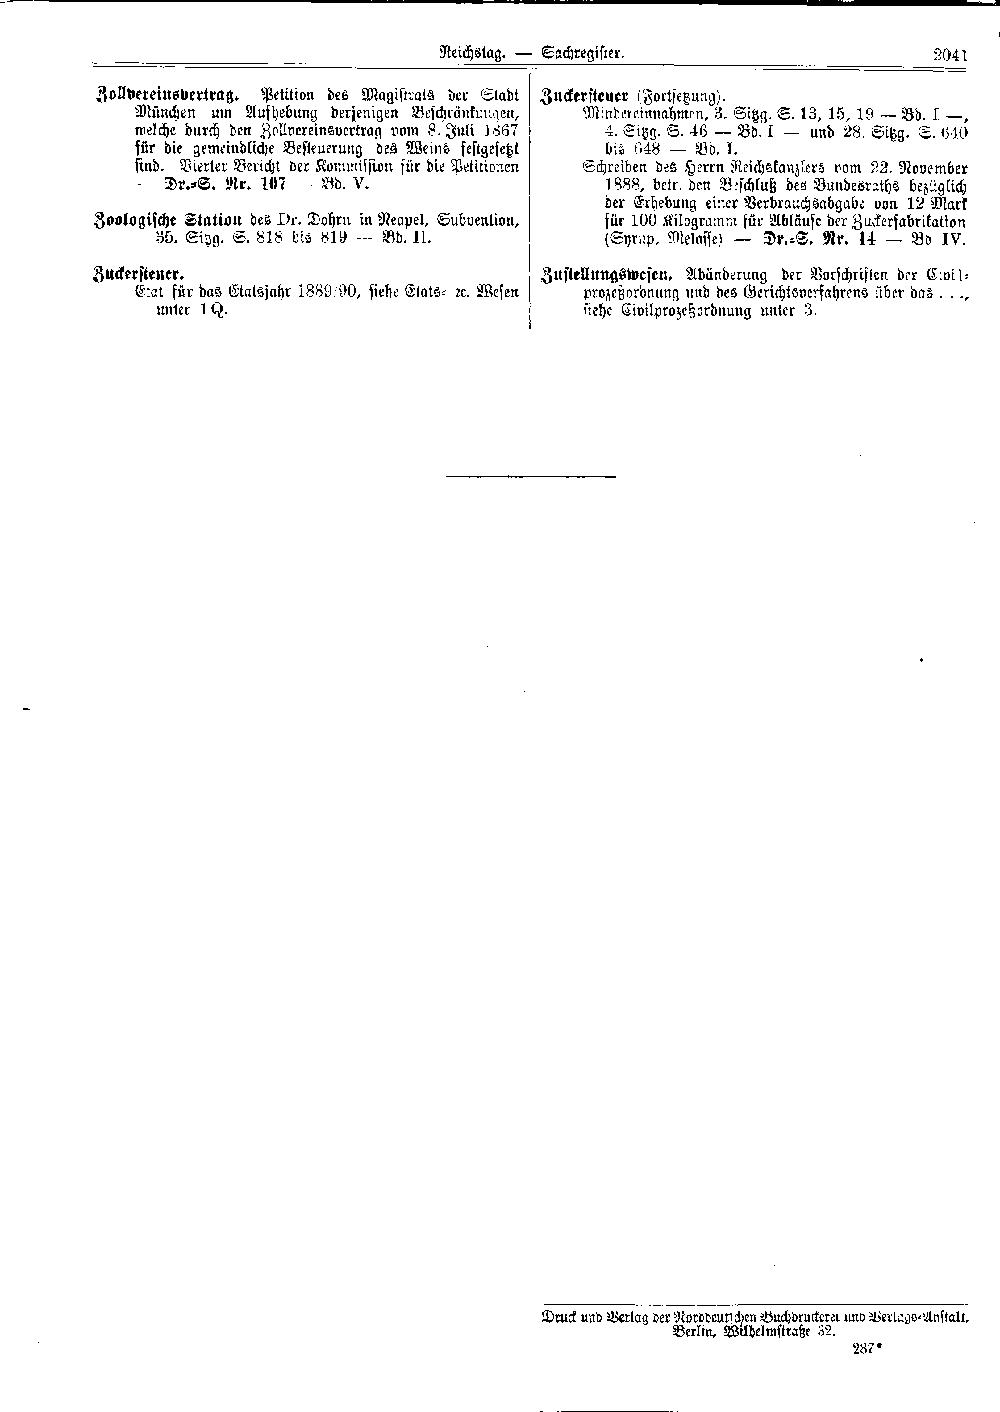 Scan of page 2041